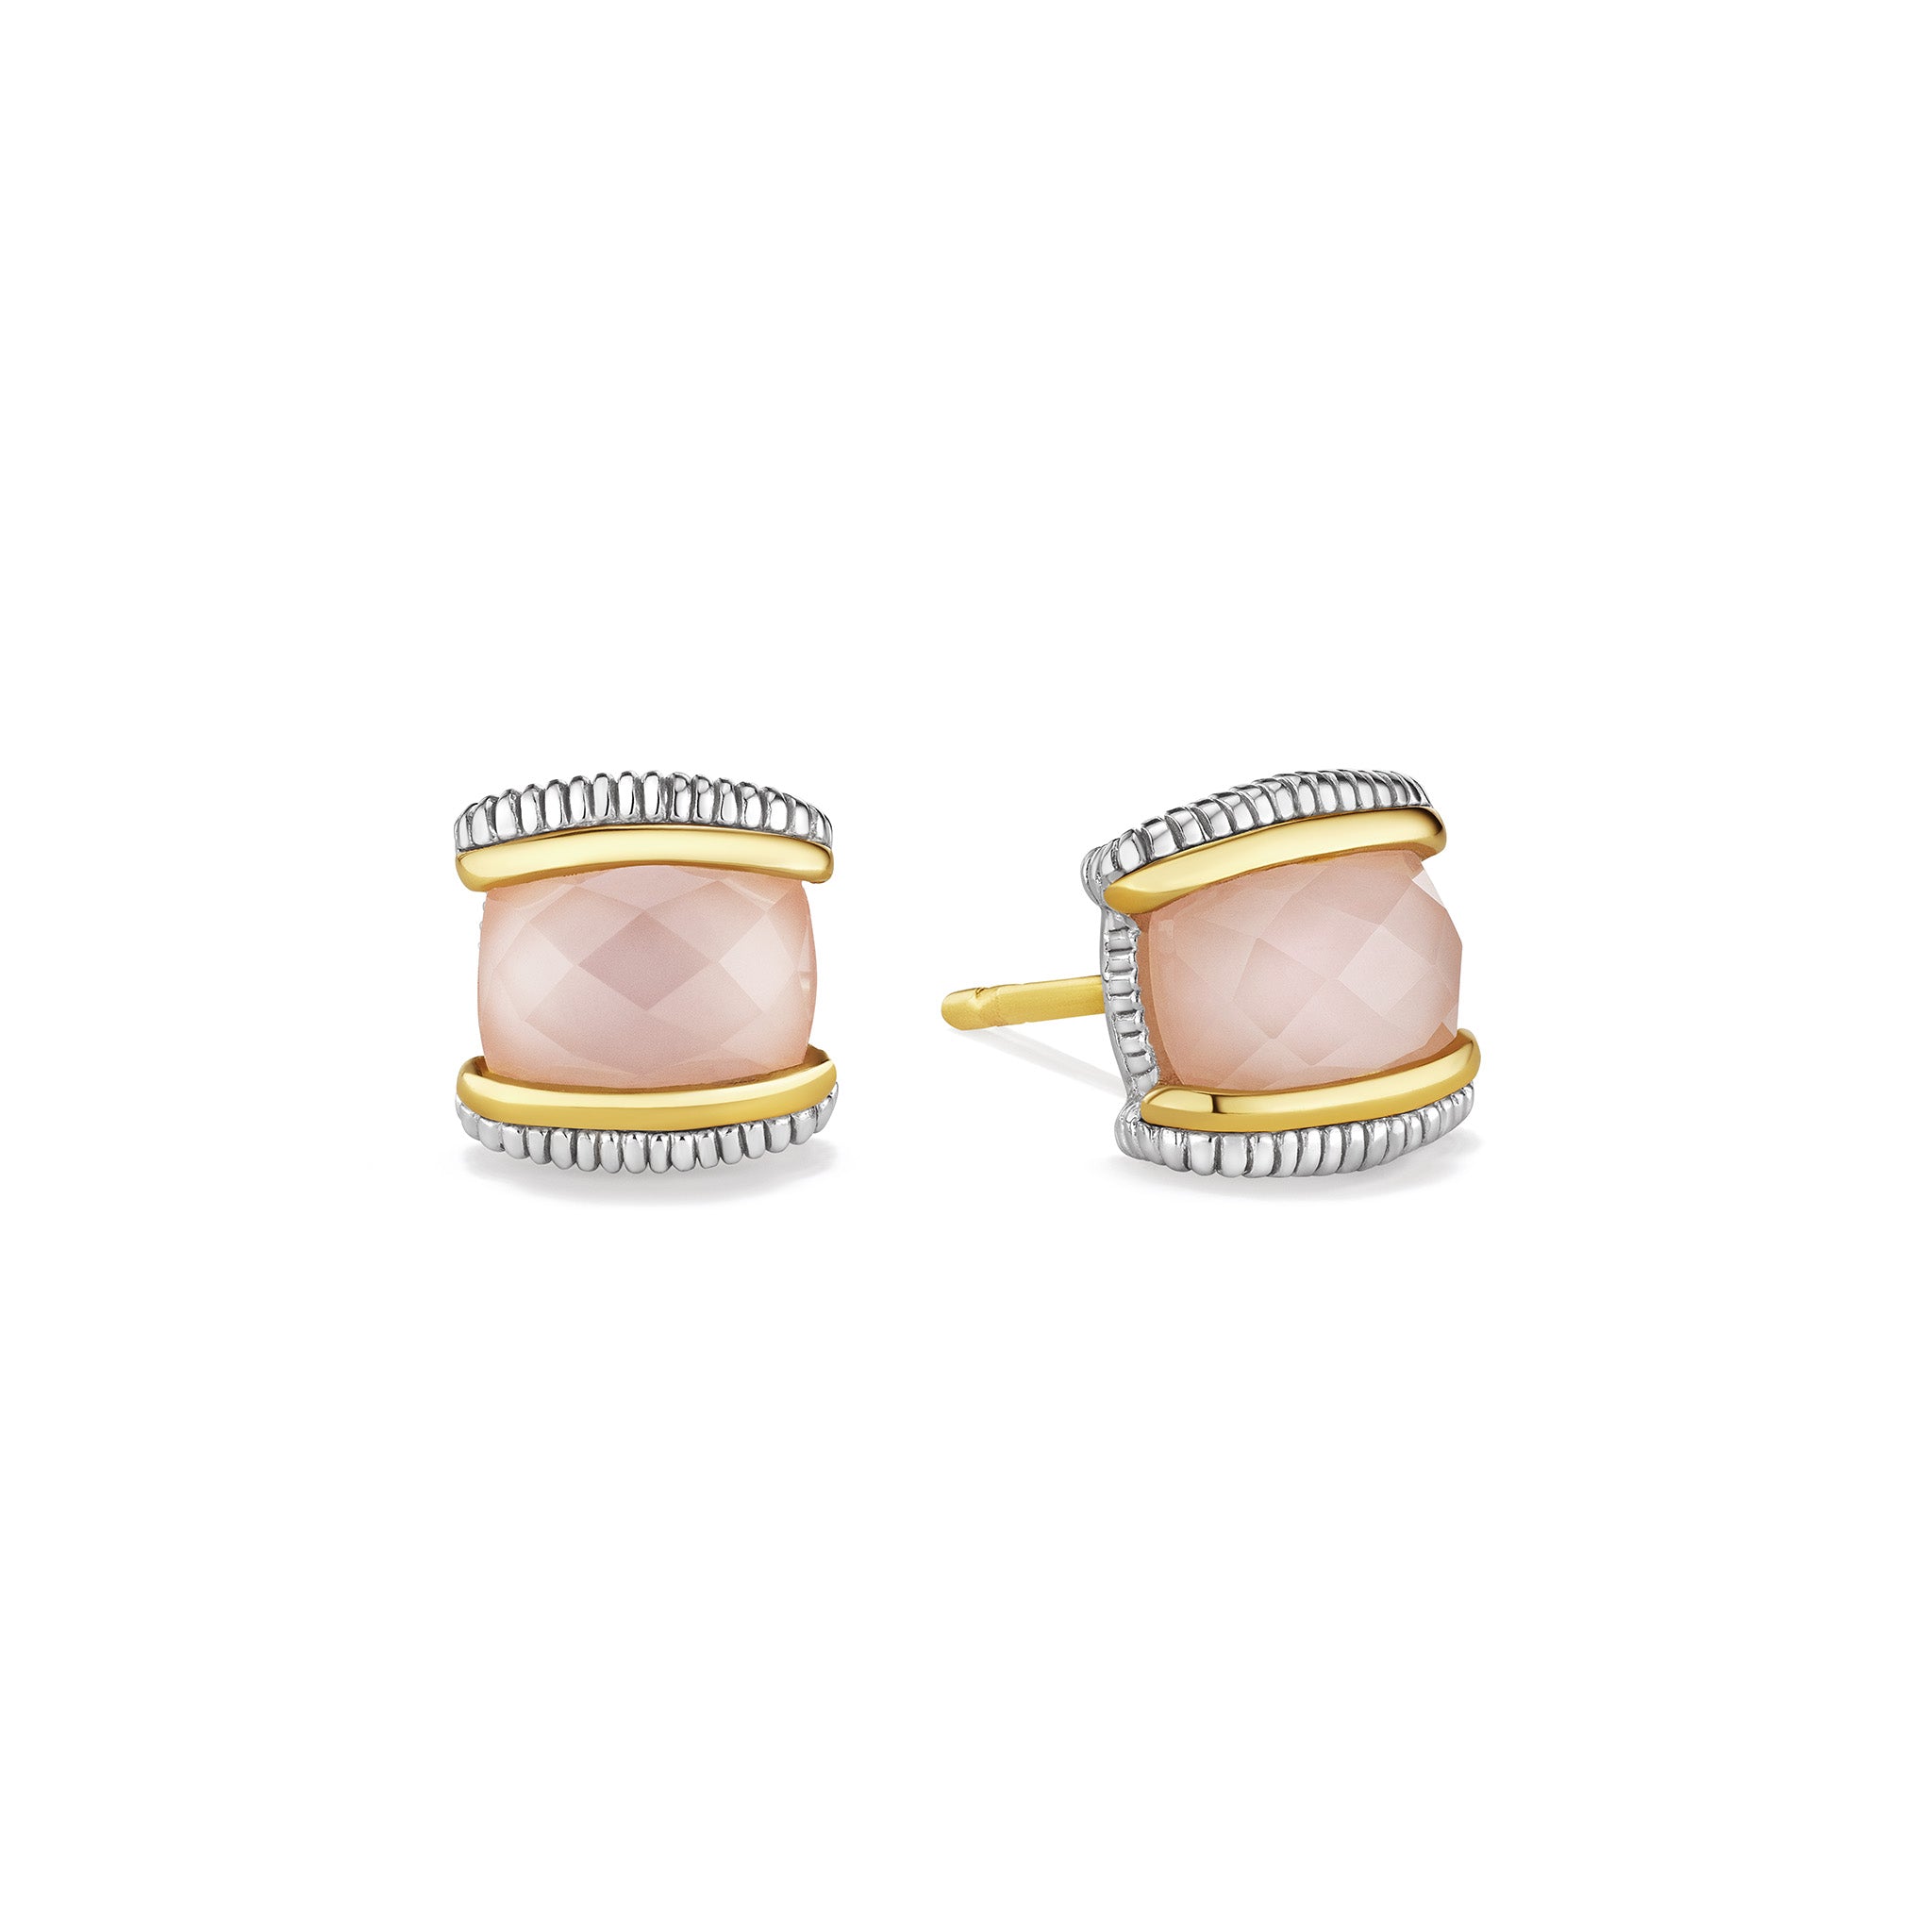 Eternity Stud Earrings With Rose Quartz Over Pink Mother Of Pearl Doublet And 18K Gold